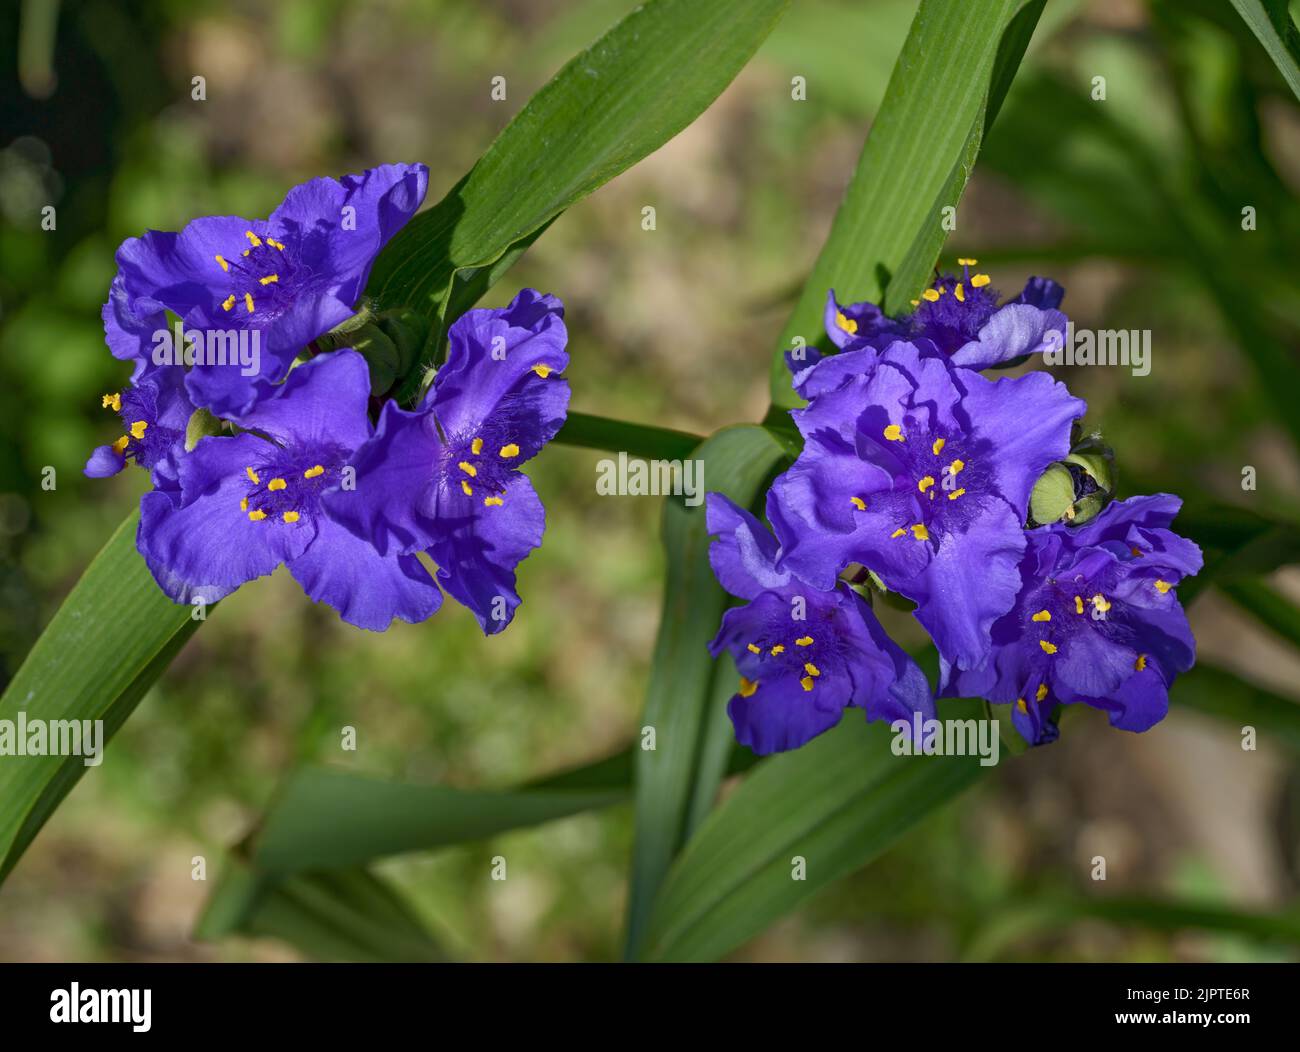 Closeup two clusters of many Tradescantia virginiana (Virginia spiderwort) flowers on green leaves background. Stock Photo